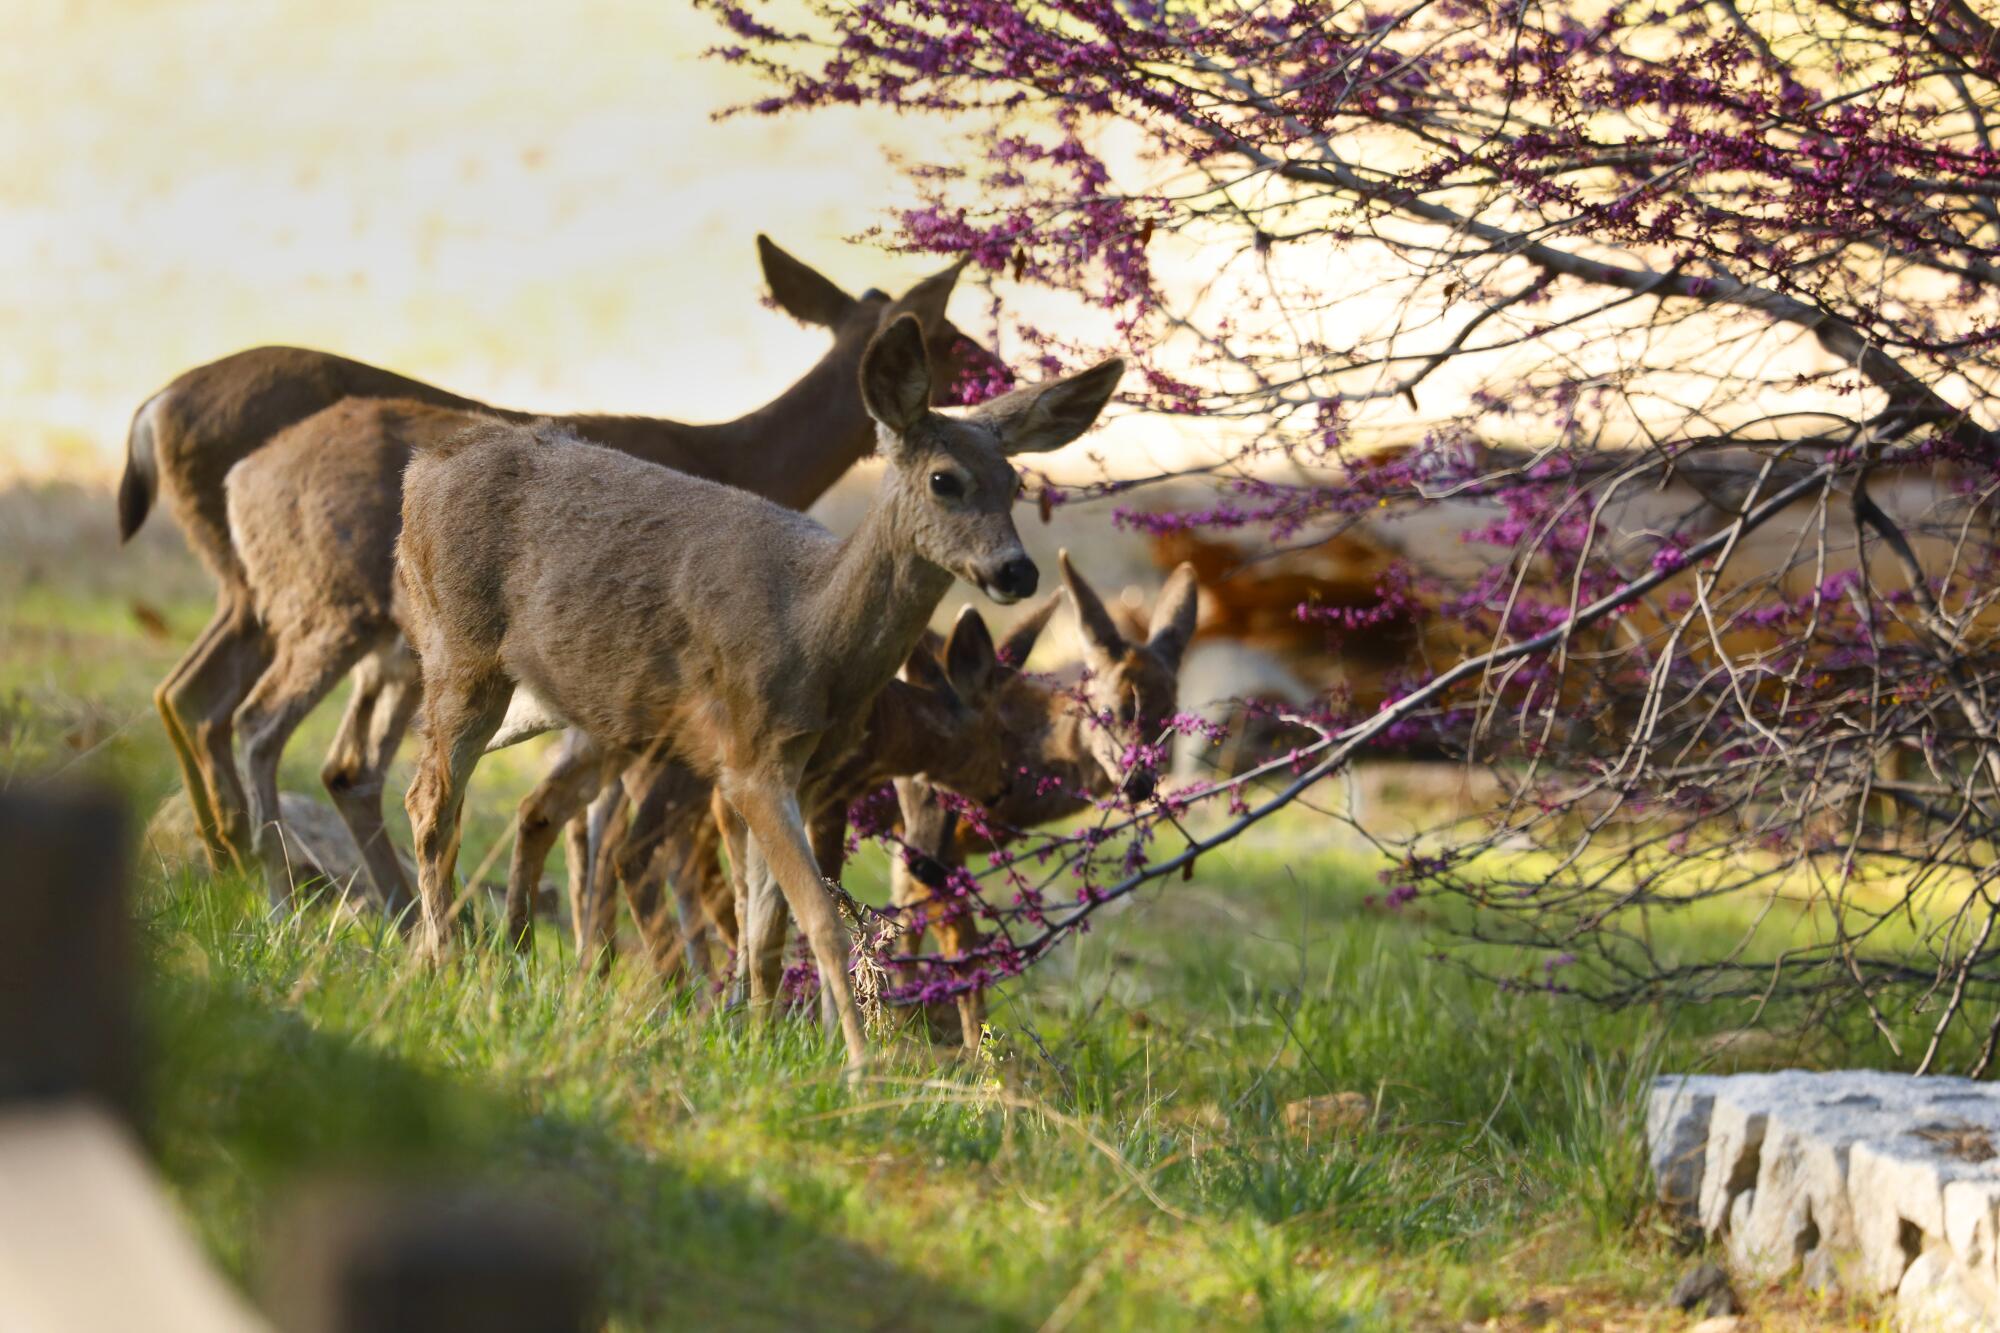 Two grown deer and two small ones graze on a tree with purple flowers in the grass